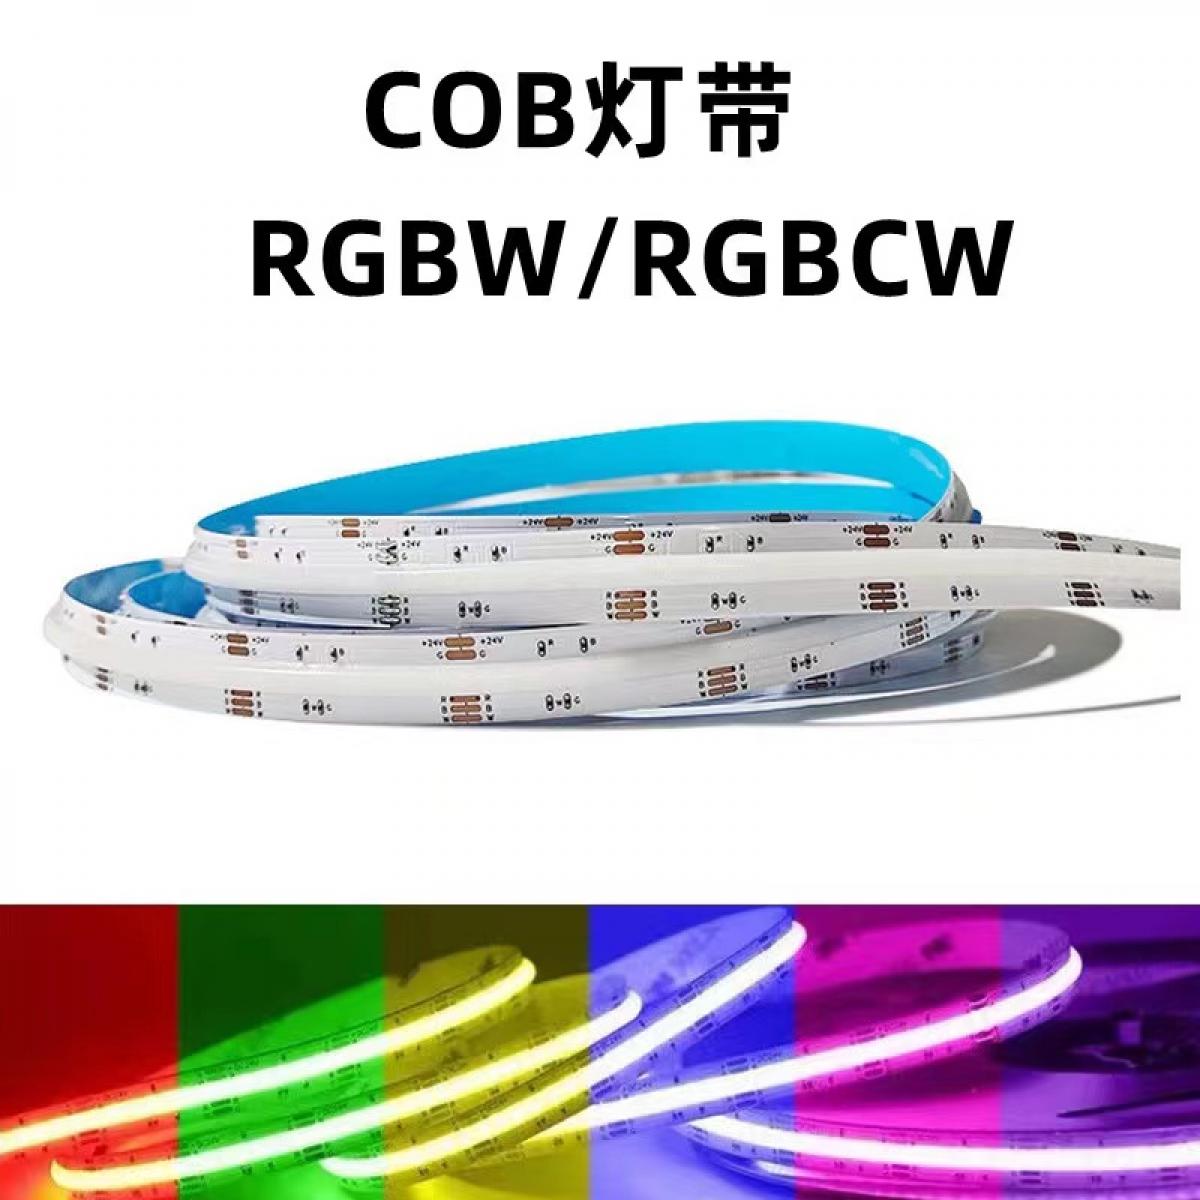 Is RGBW better than RGB?